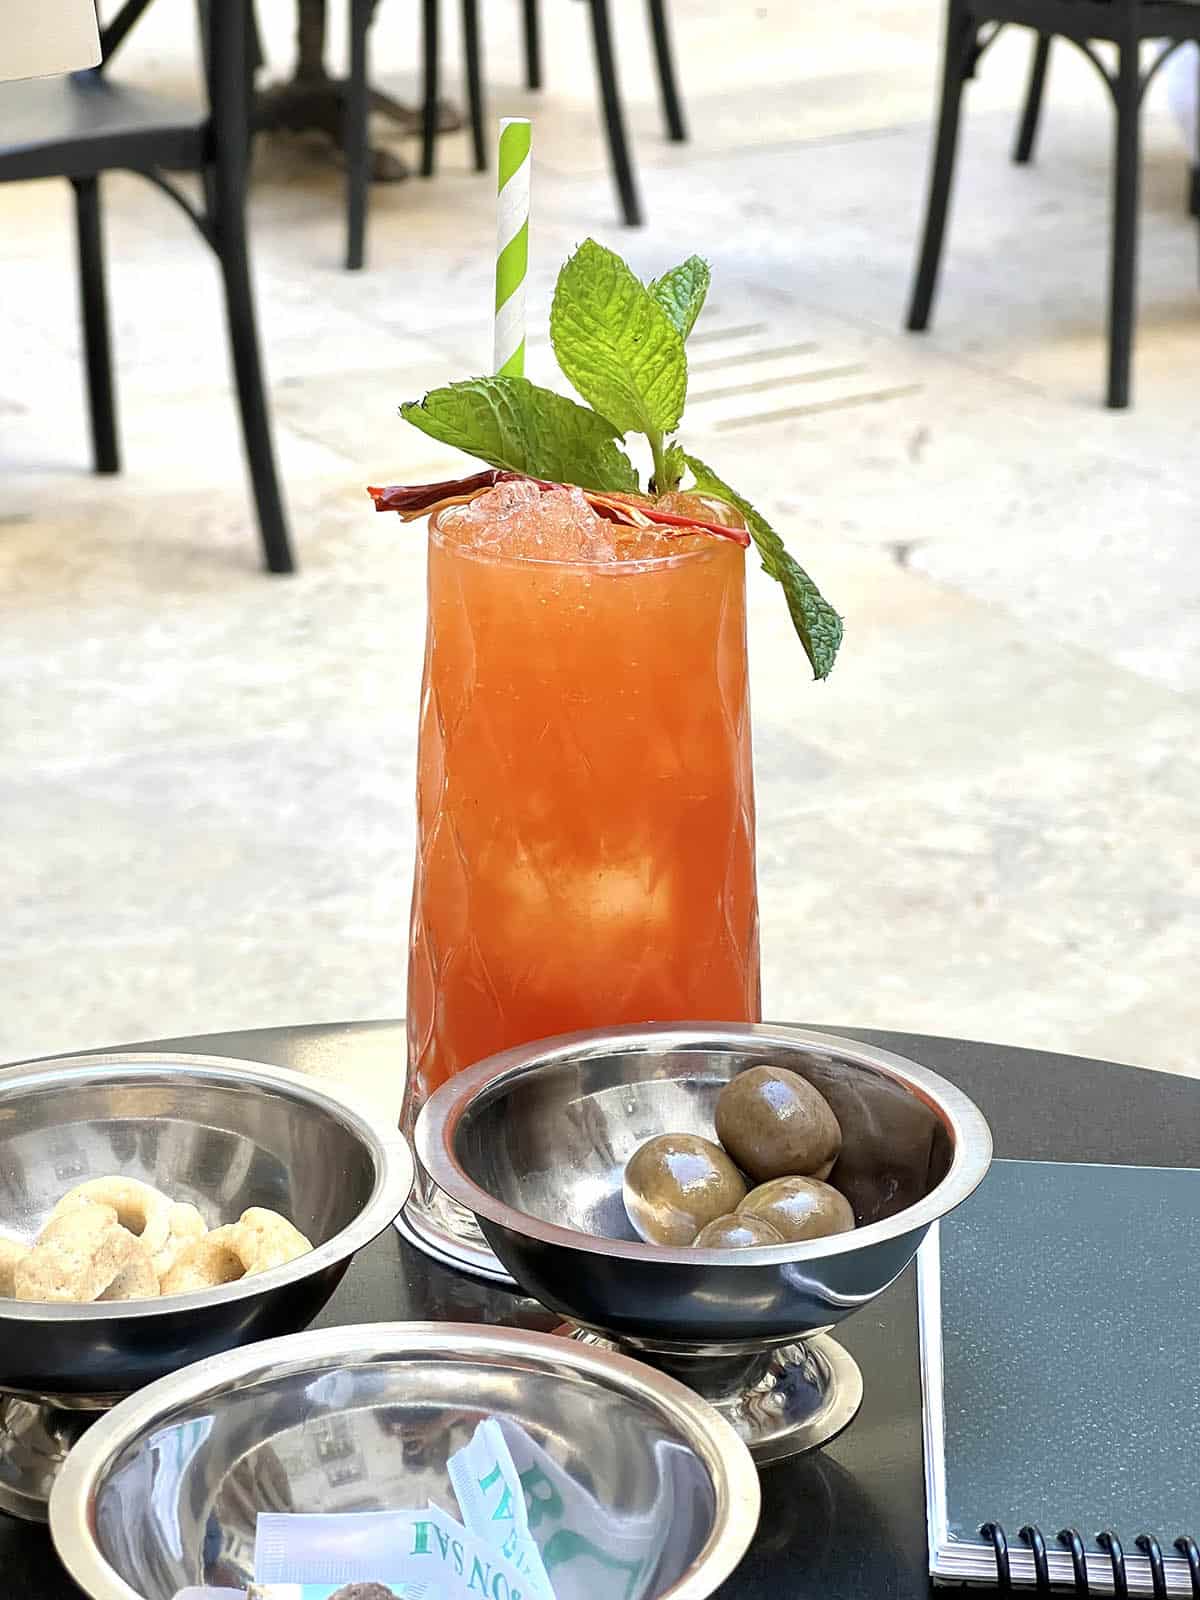 An image of a chilli flavoured cocktail are Cortile Verga 